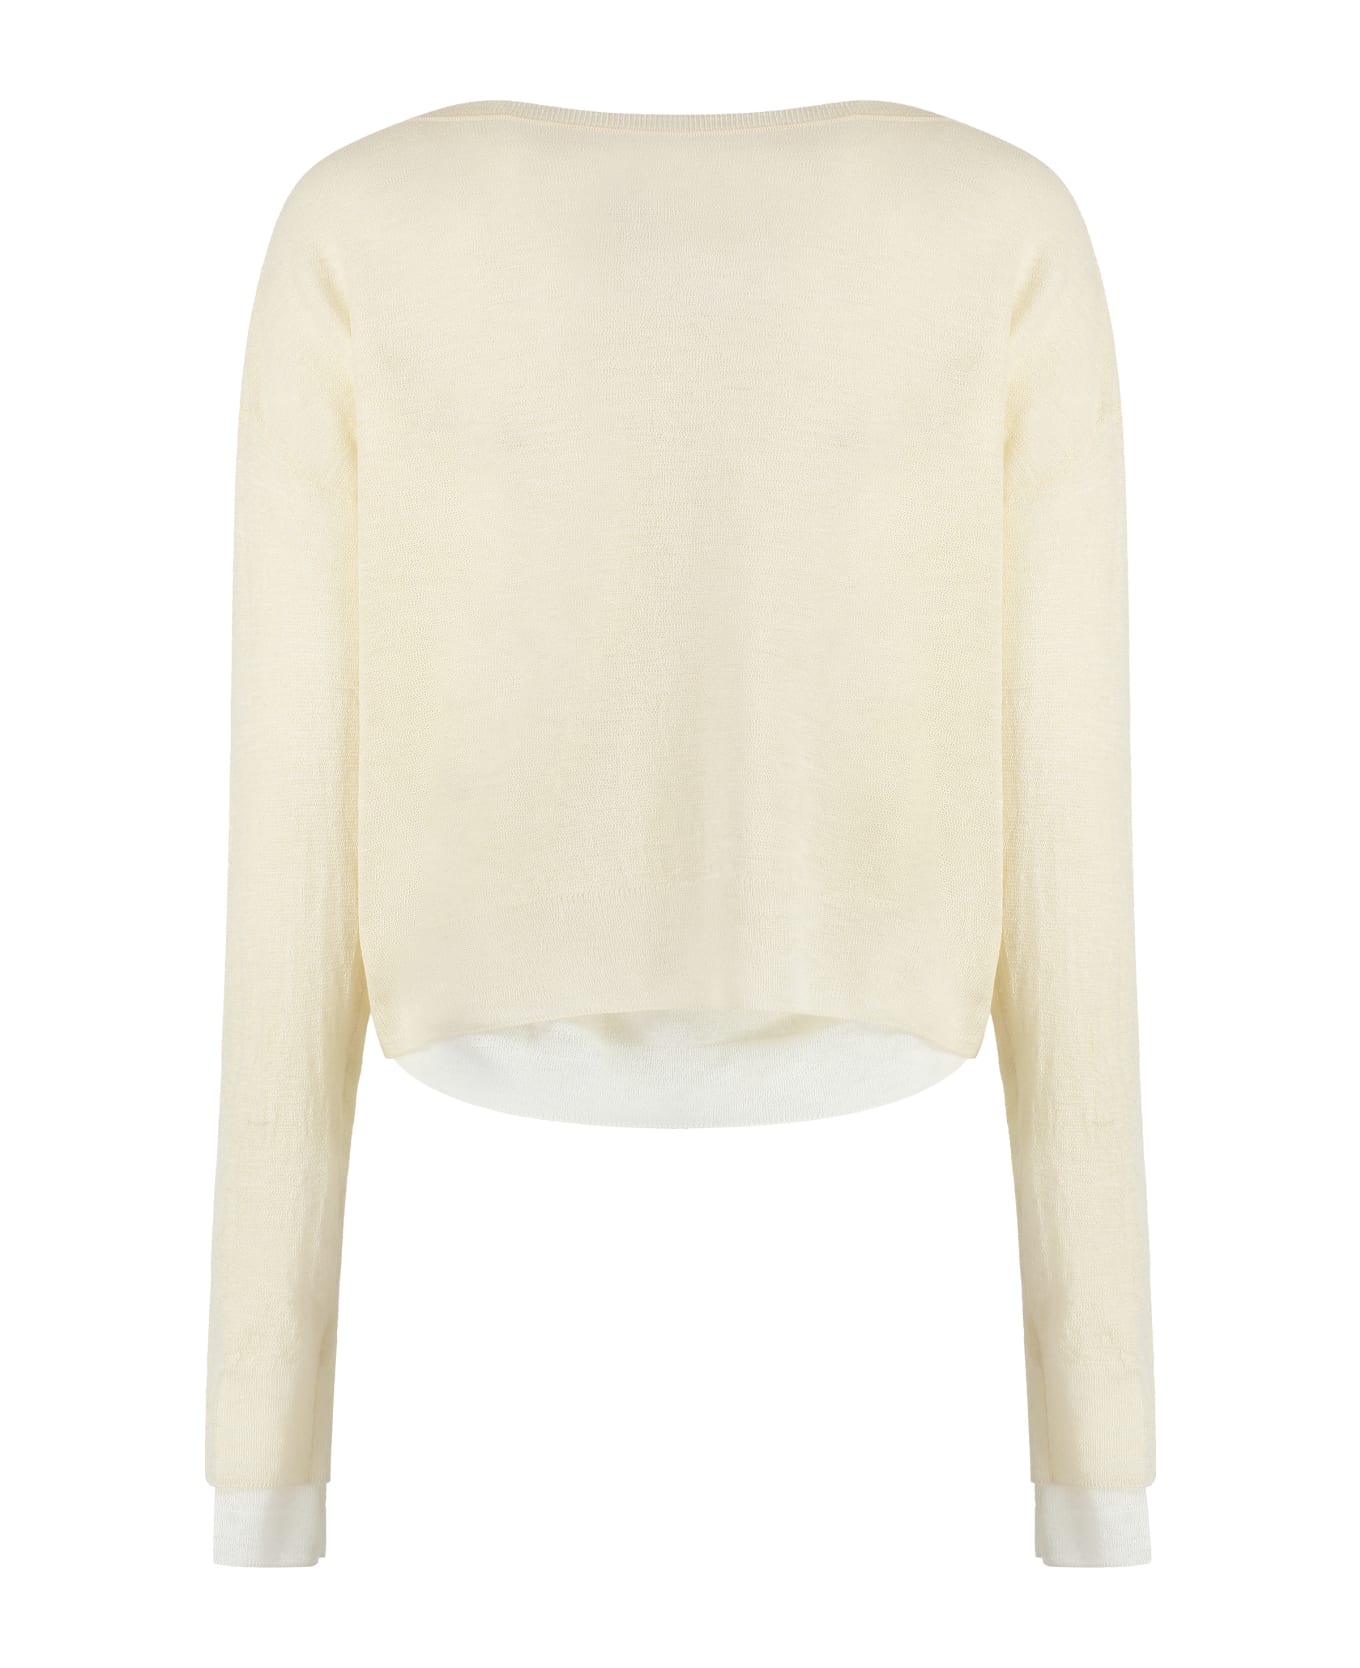 Vince Long Sleeve Crew-neck Sweater - Ivory